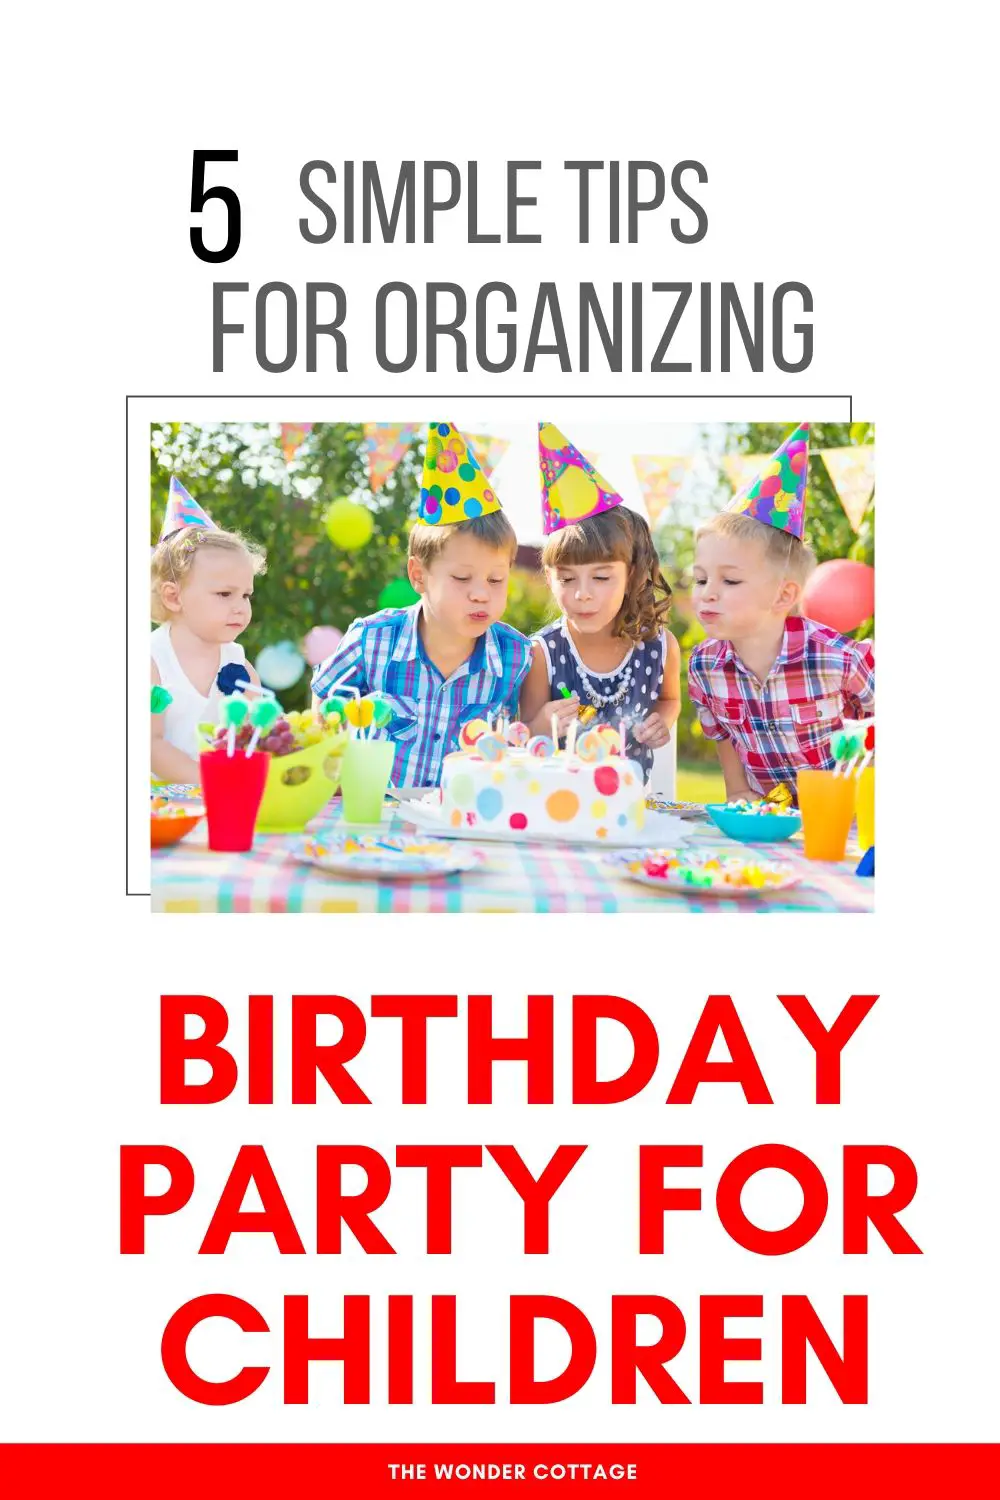 tips for throwing a birthday party for children